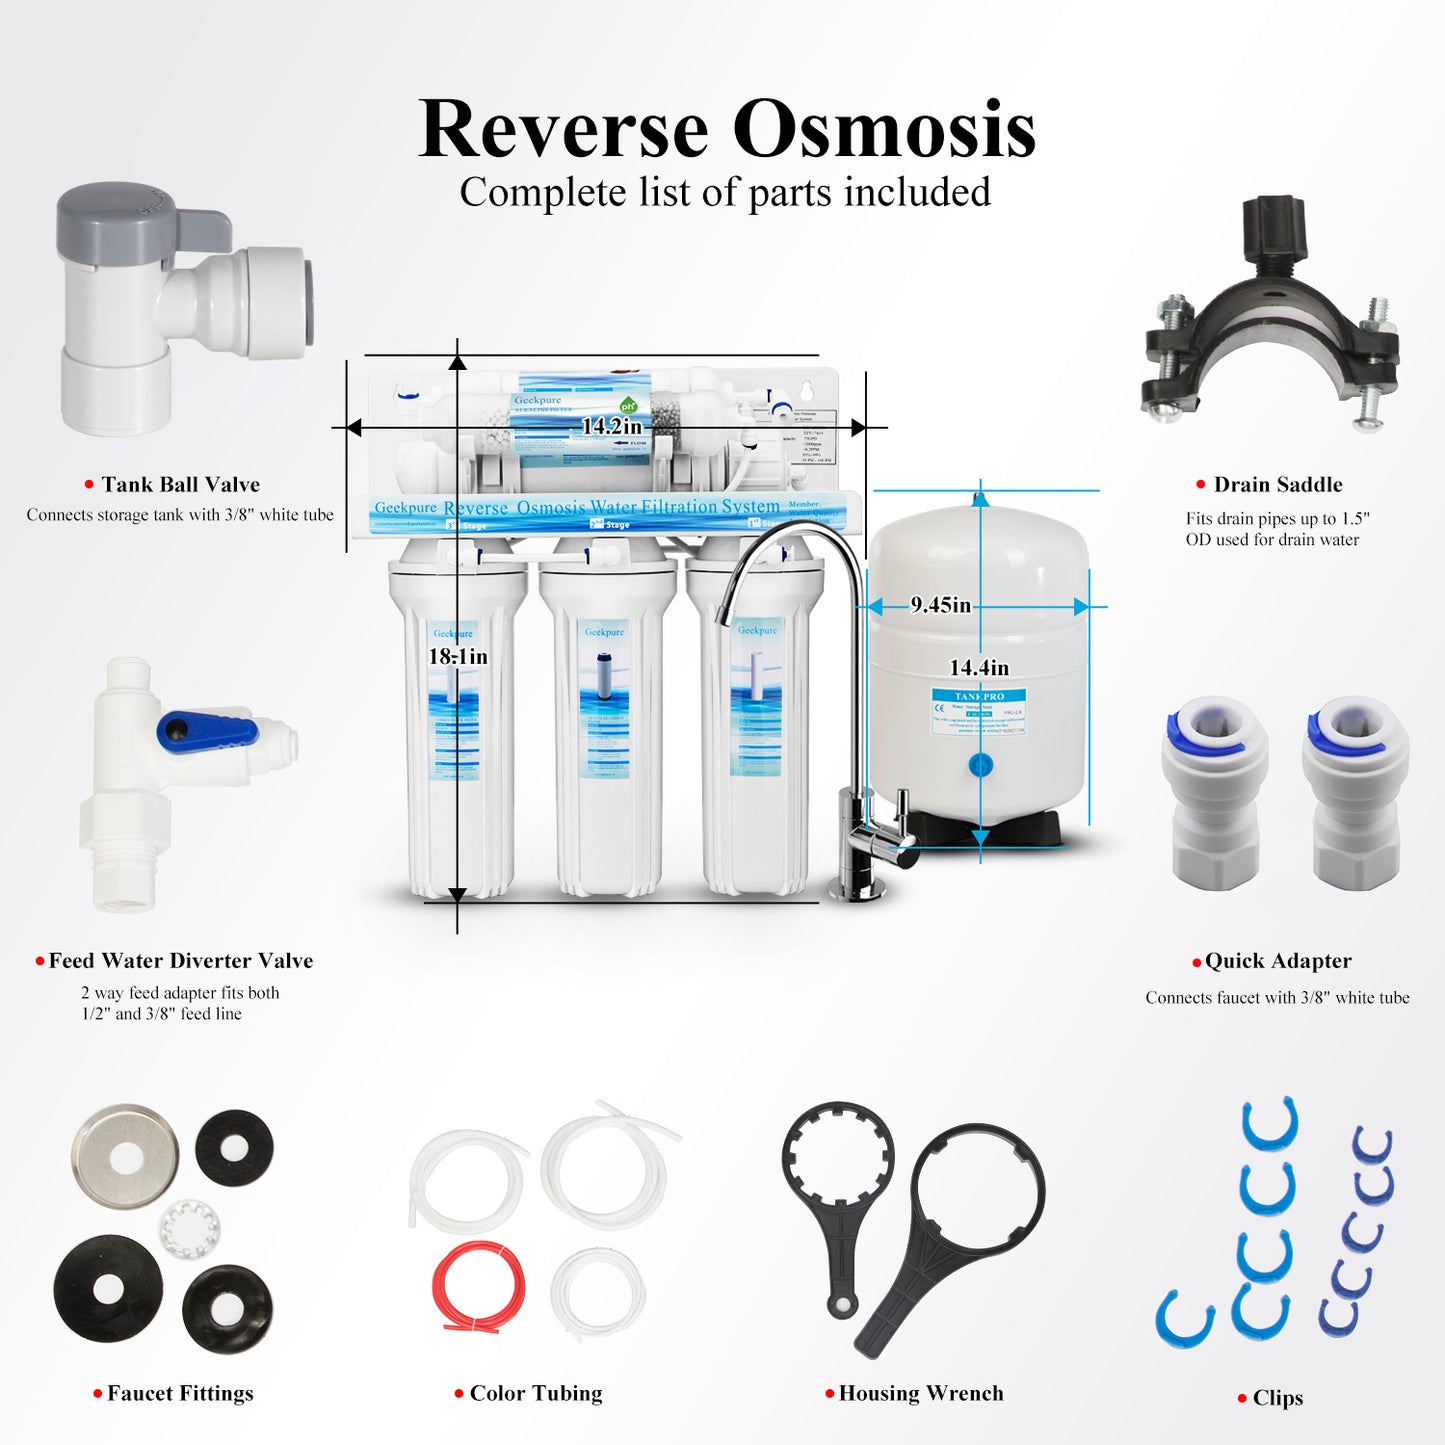 6-Stage Reverse Osmosis Water Filter System with Alkaline pH+Filter